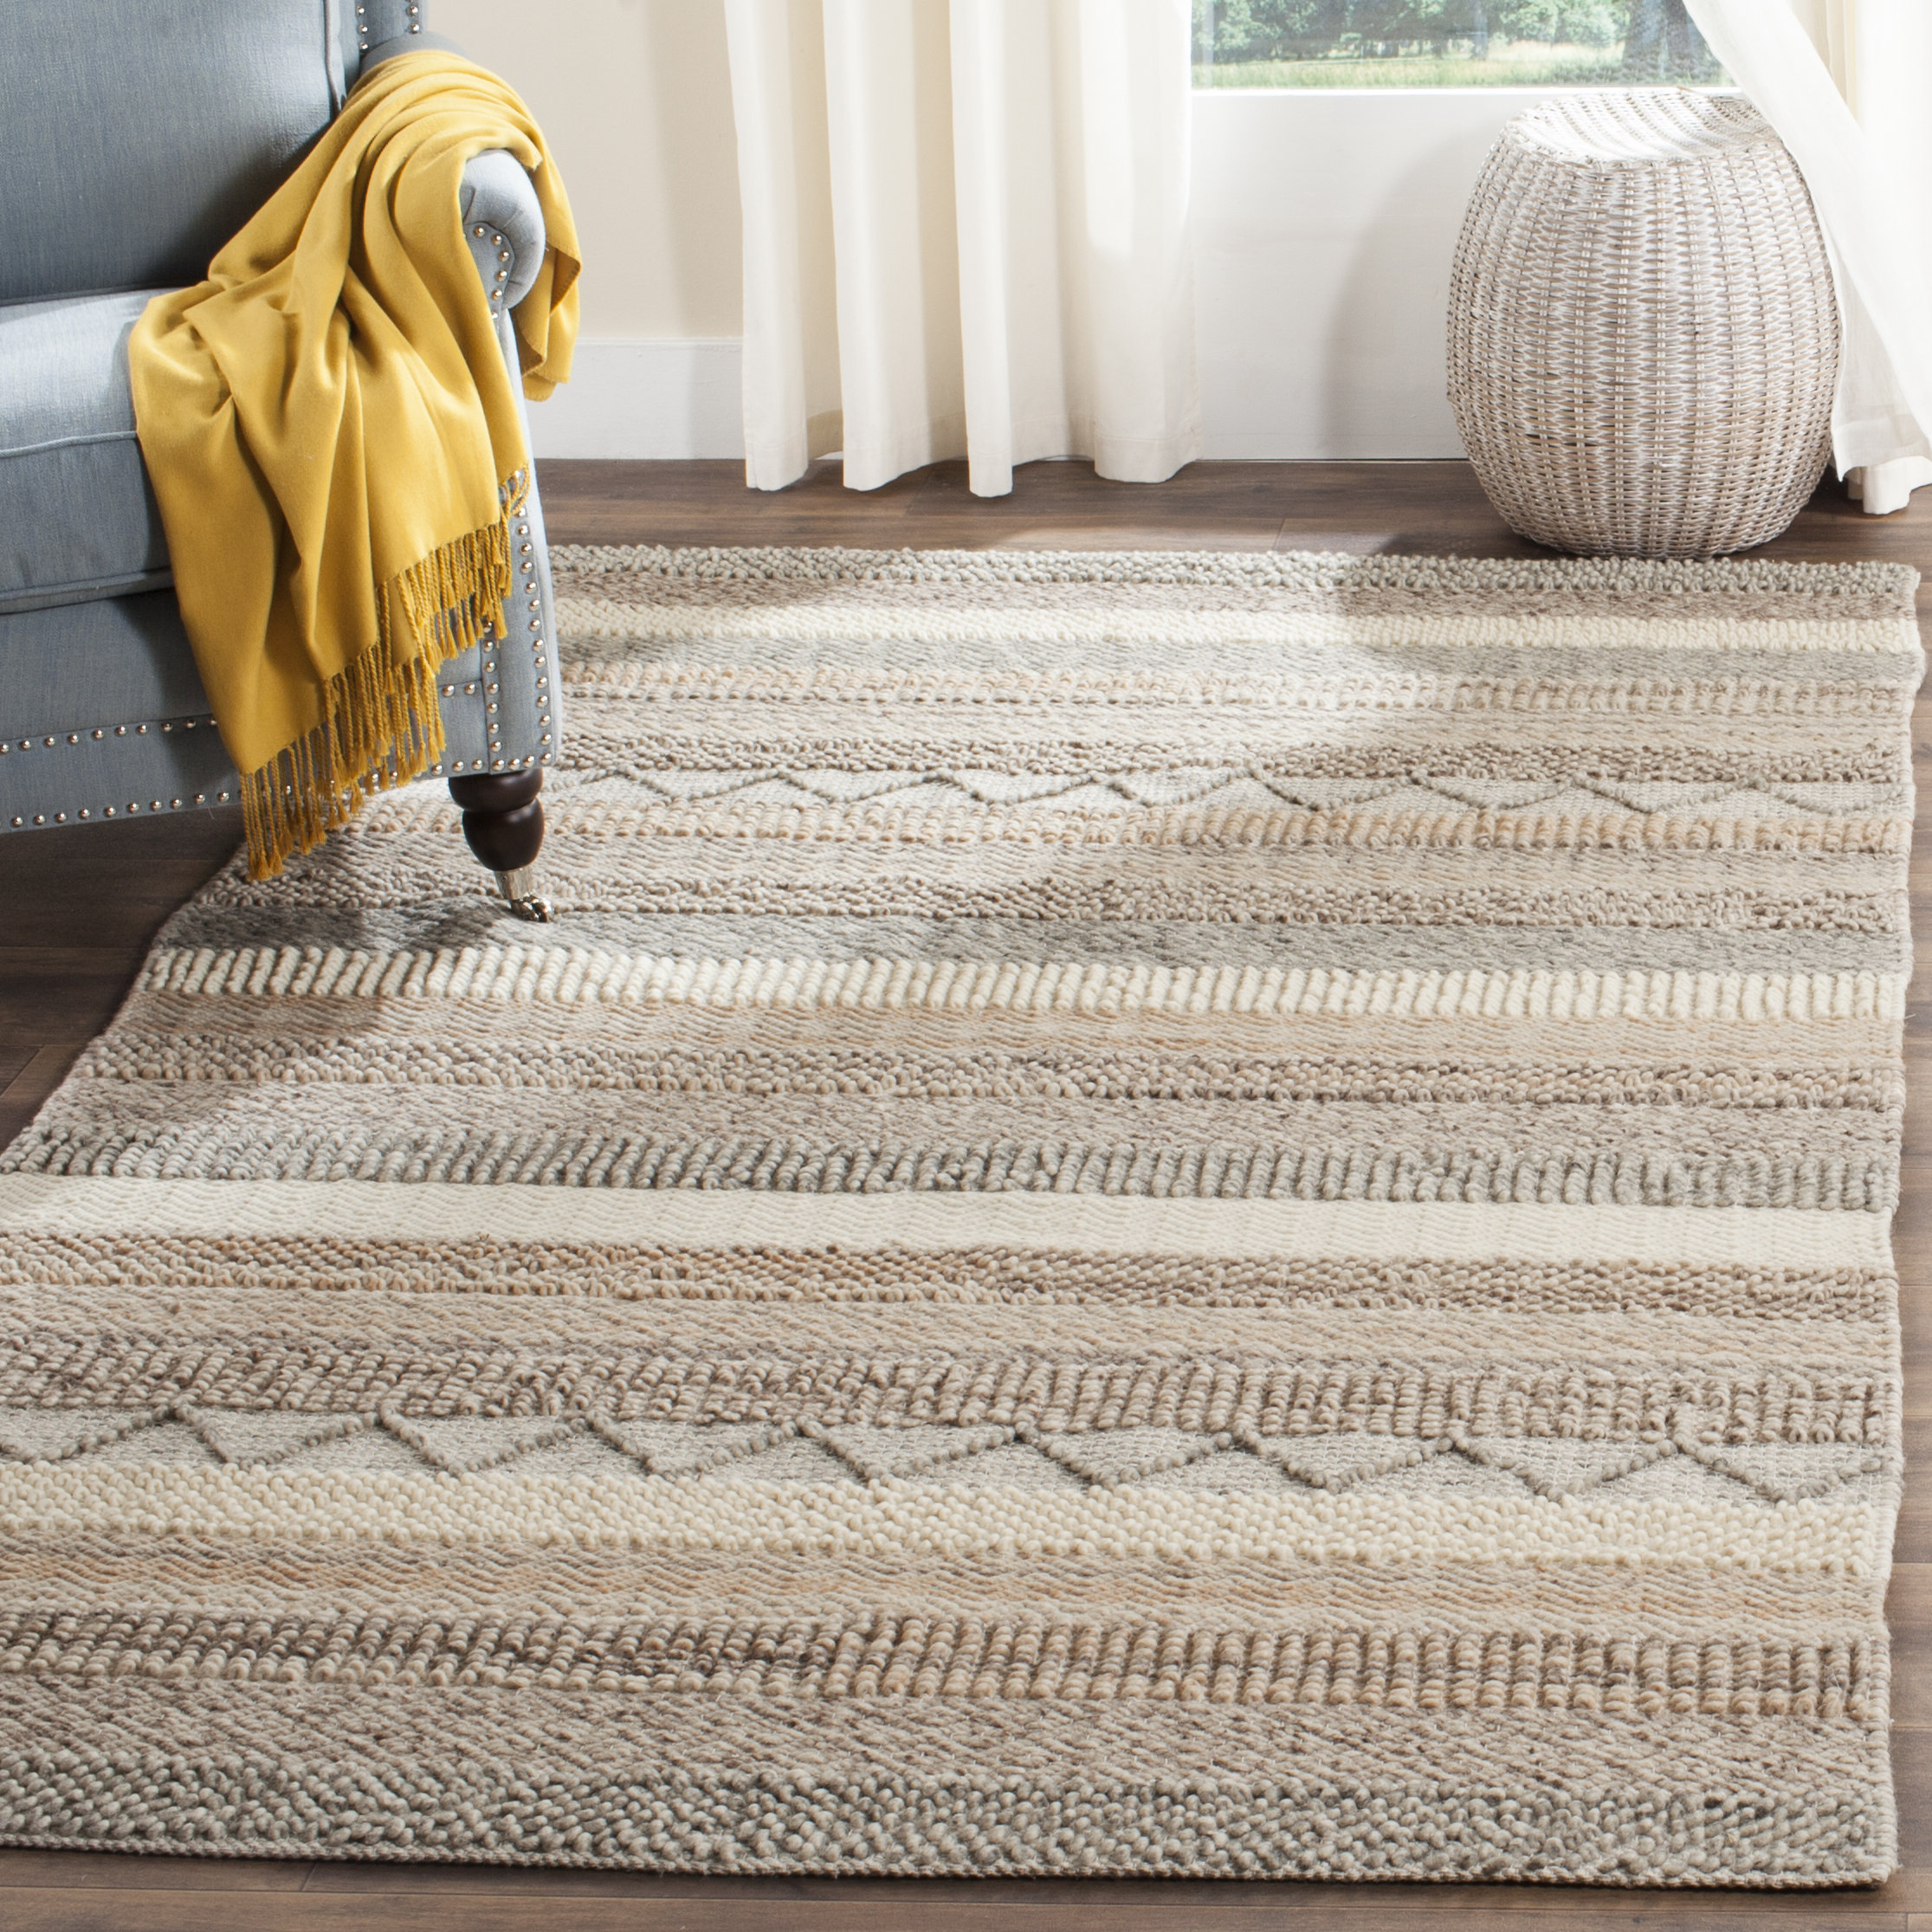 Large Area Rugs Winter in The Woodland Modern Floor Carpet No-Shedding Non-Slip Indoor Rug Home Décor 6' x 4'